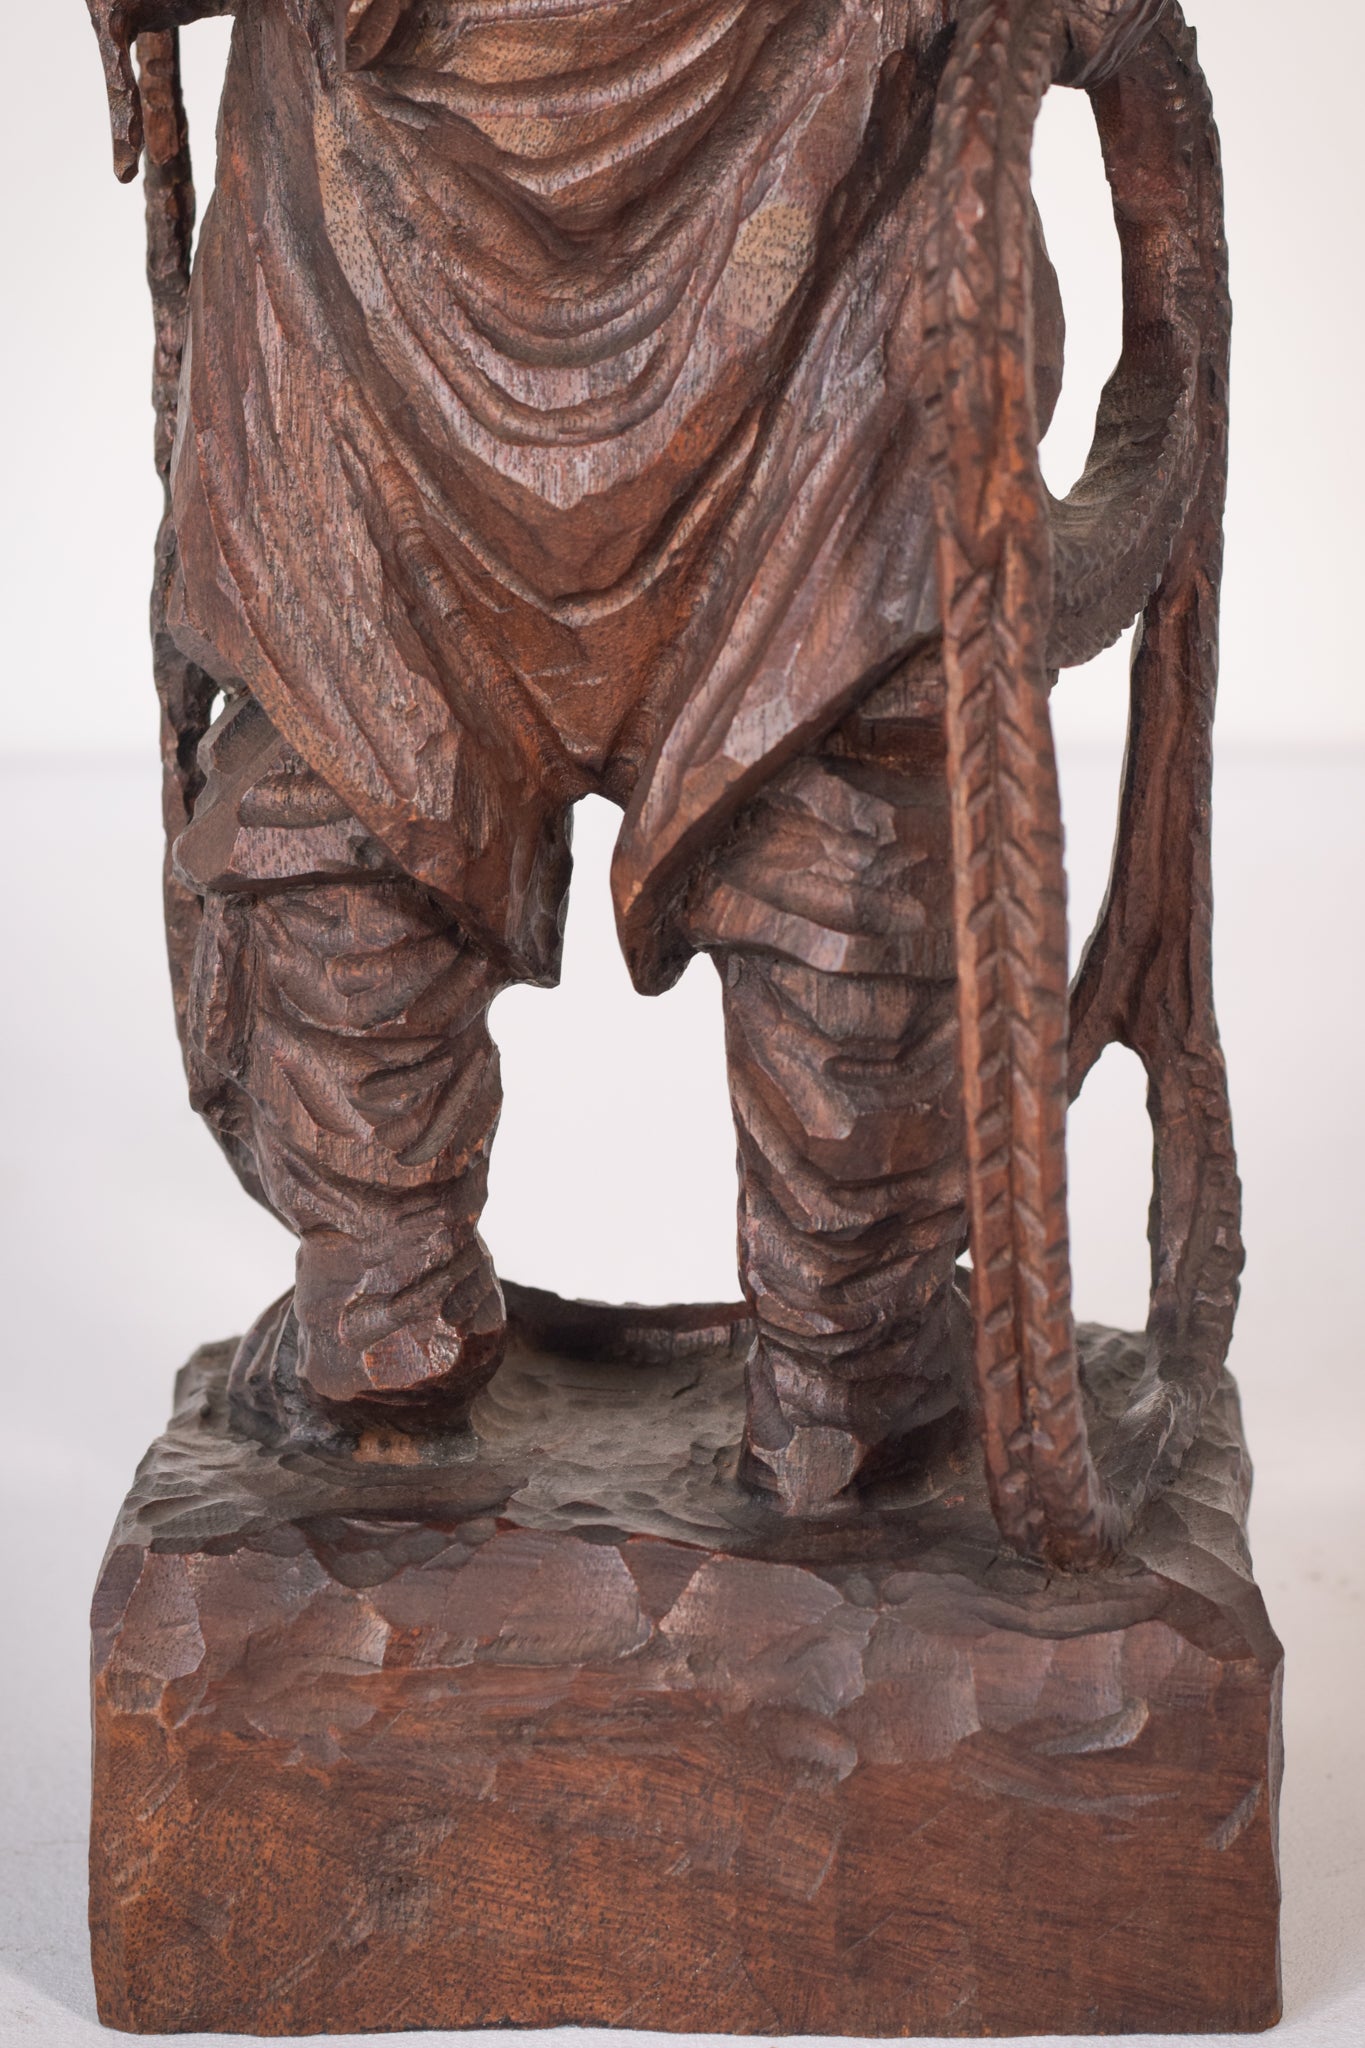 Hand Carved Wooden Sculpture - A Male Figure